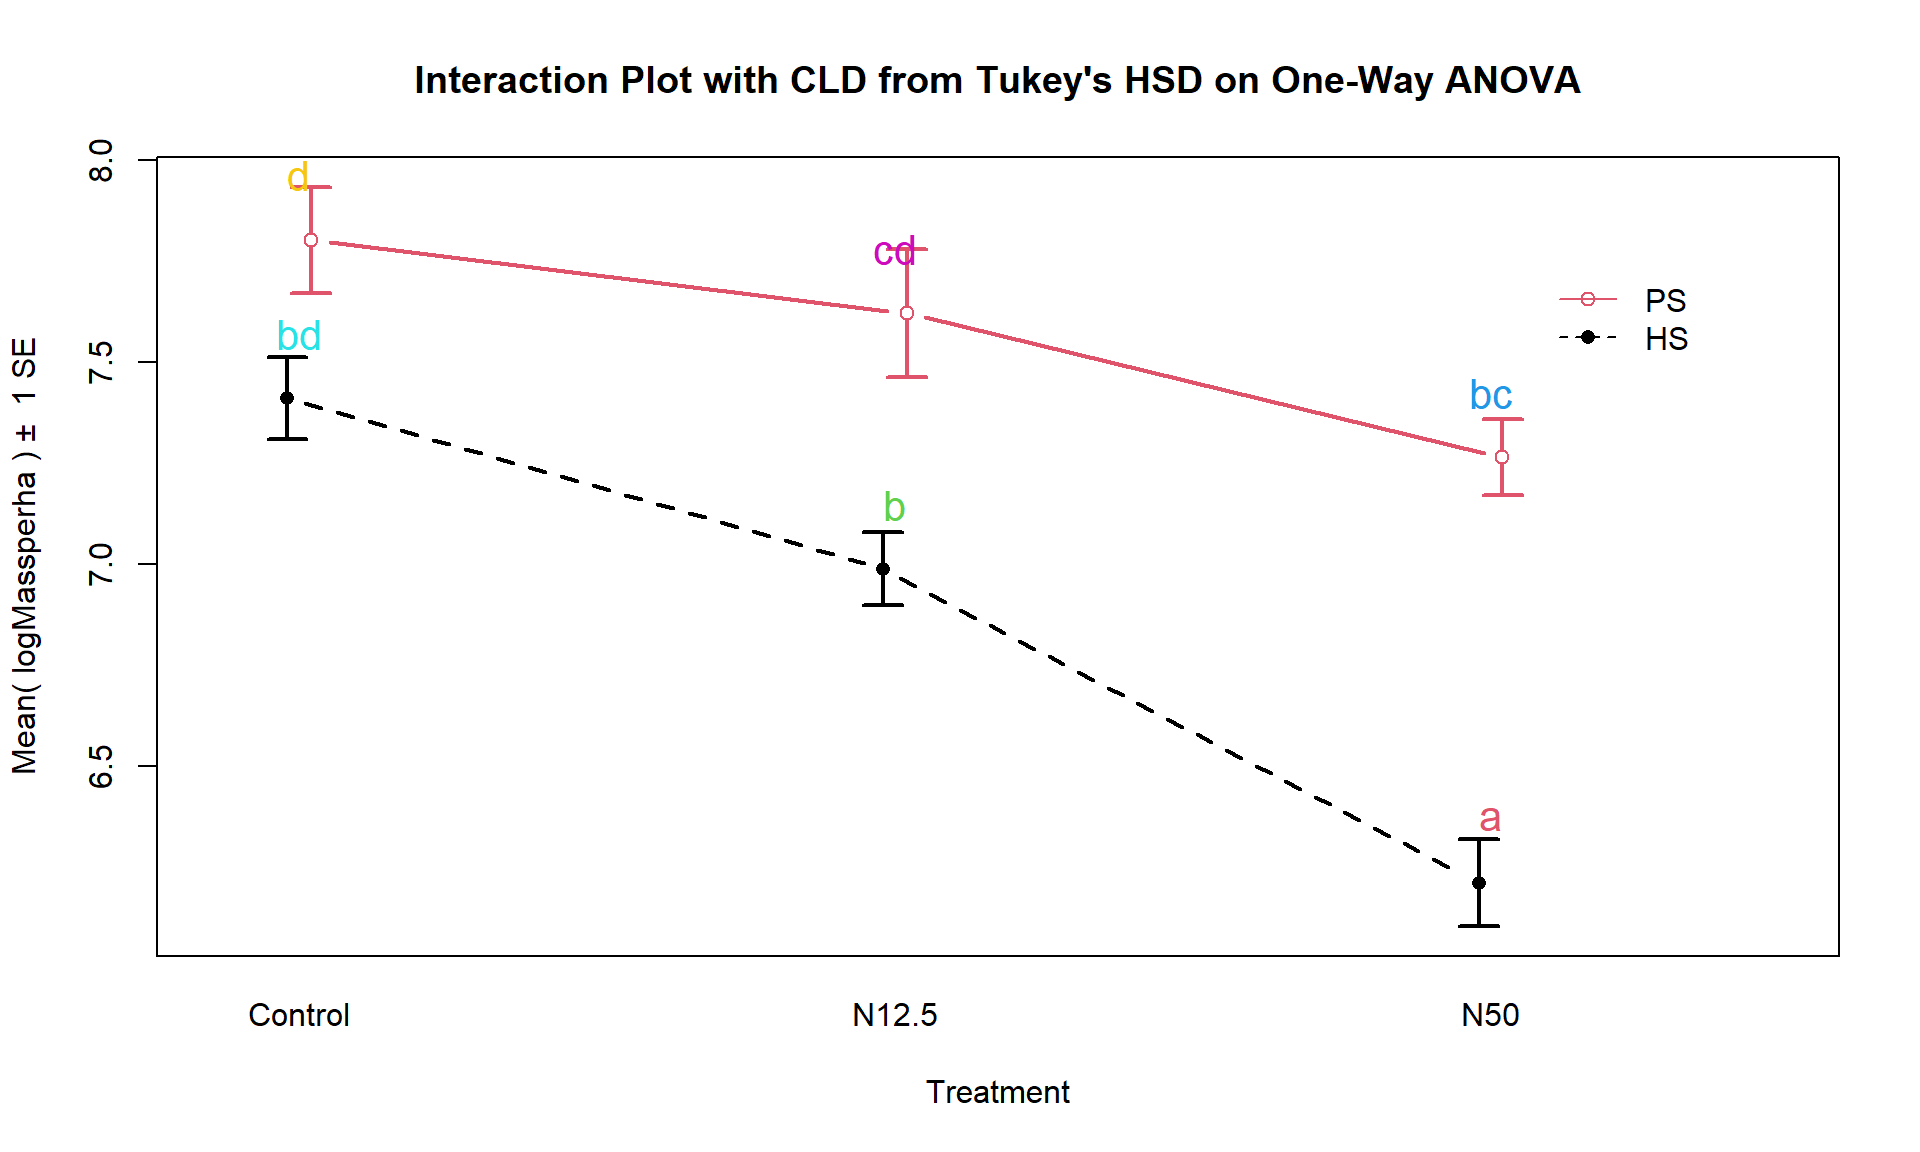 Interaction plot for log-biomass with CLD from Tukey’s HSD for all pairwise comparisons.